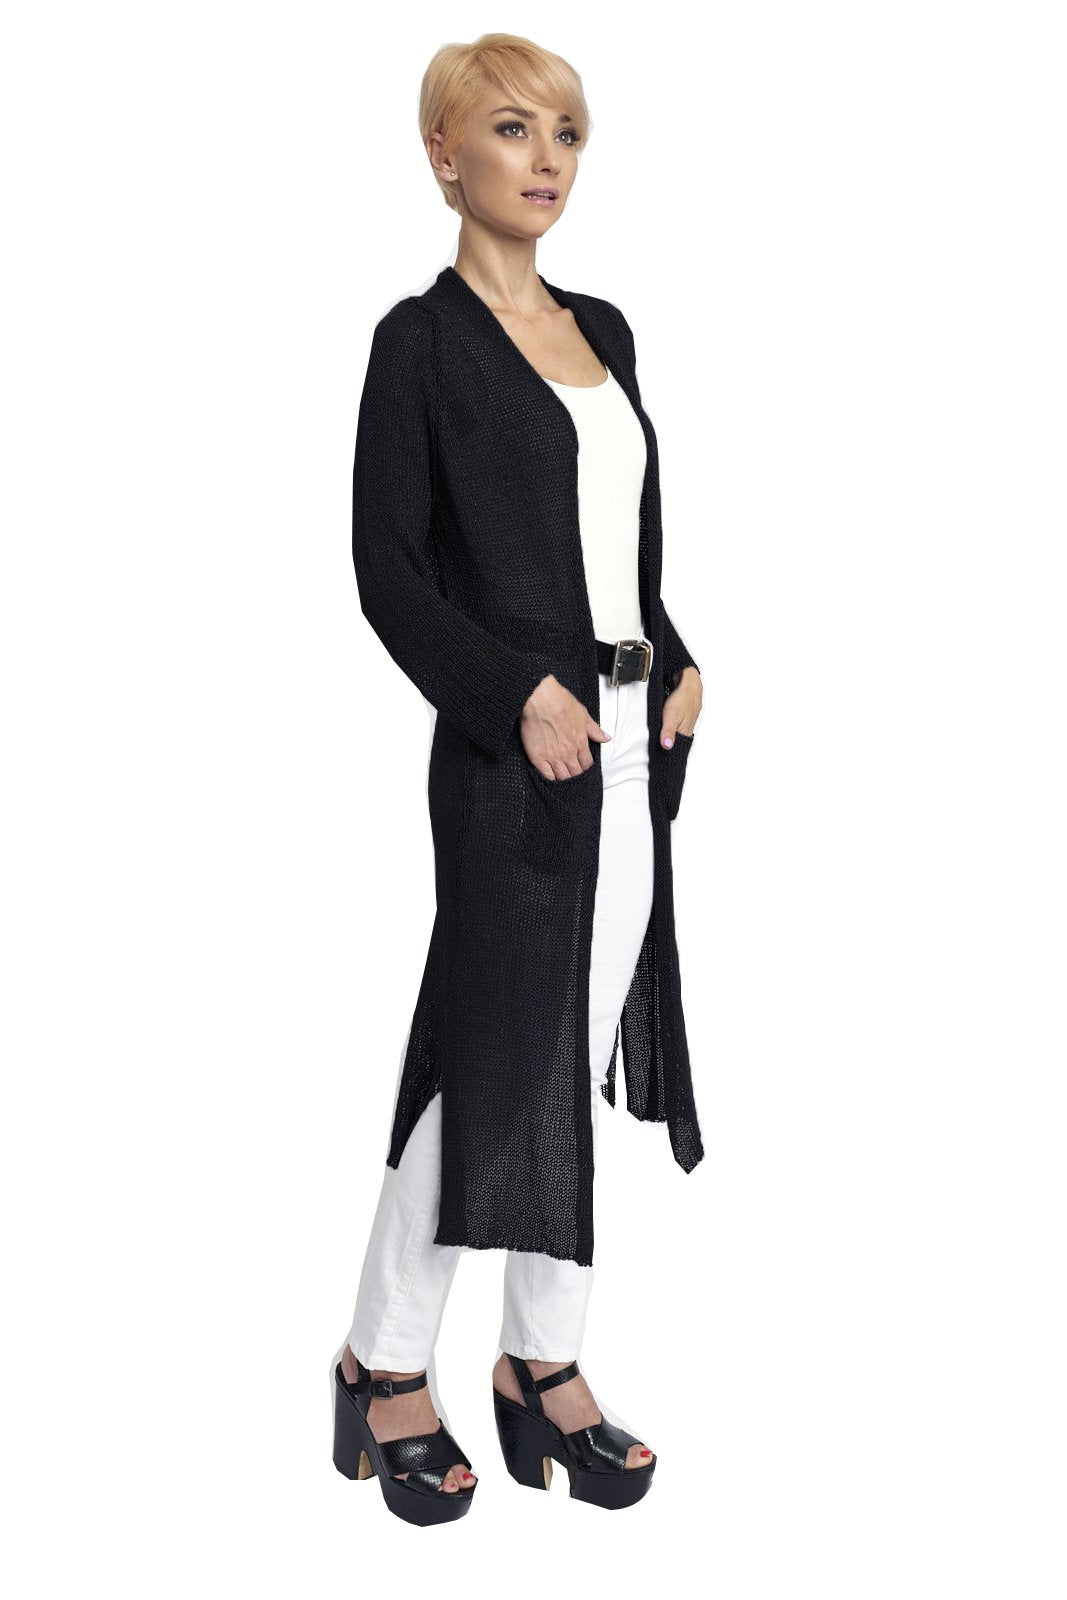 Women's Knit Duster, Slits and Pockets